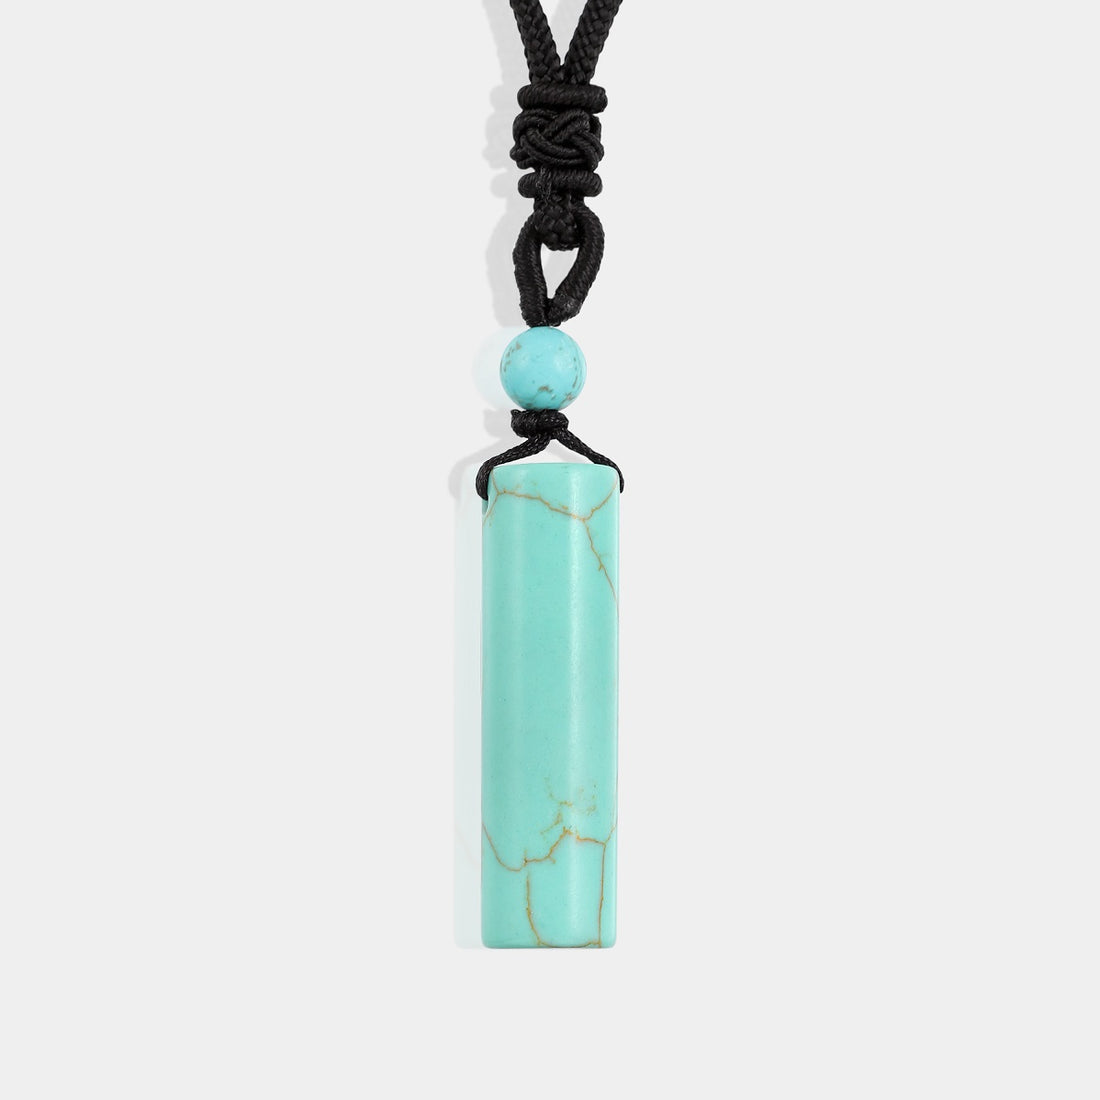 Natural Turquoise Cylinder Adjustable Rope Pendant Necklace with vibrant blue-green gemstone and adjustable length